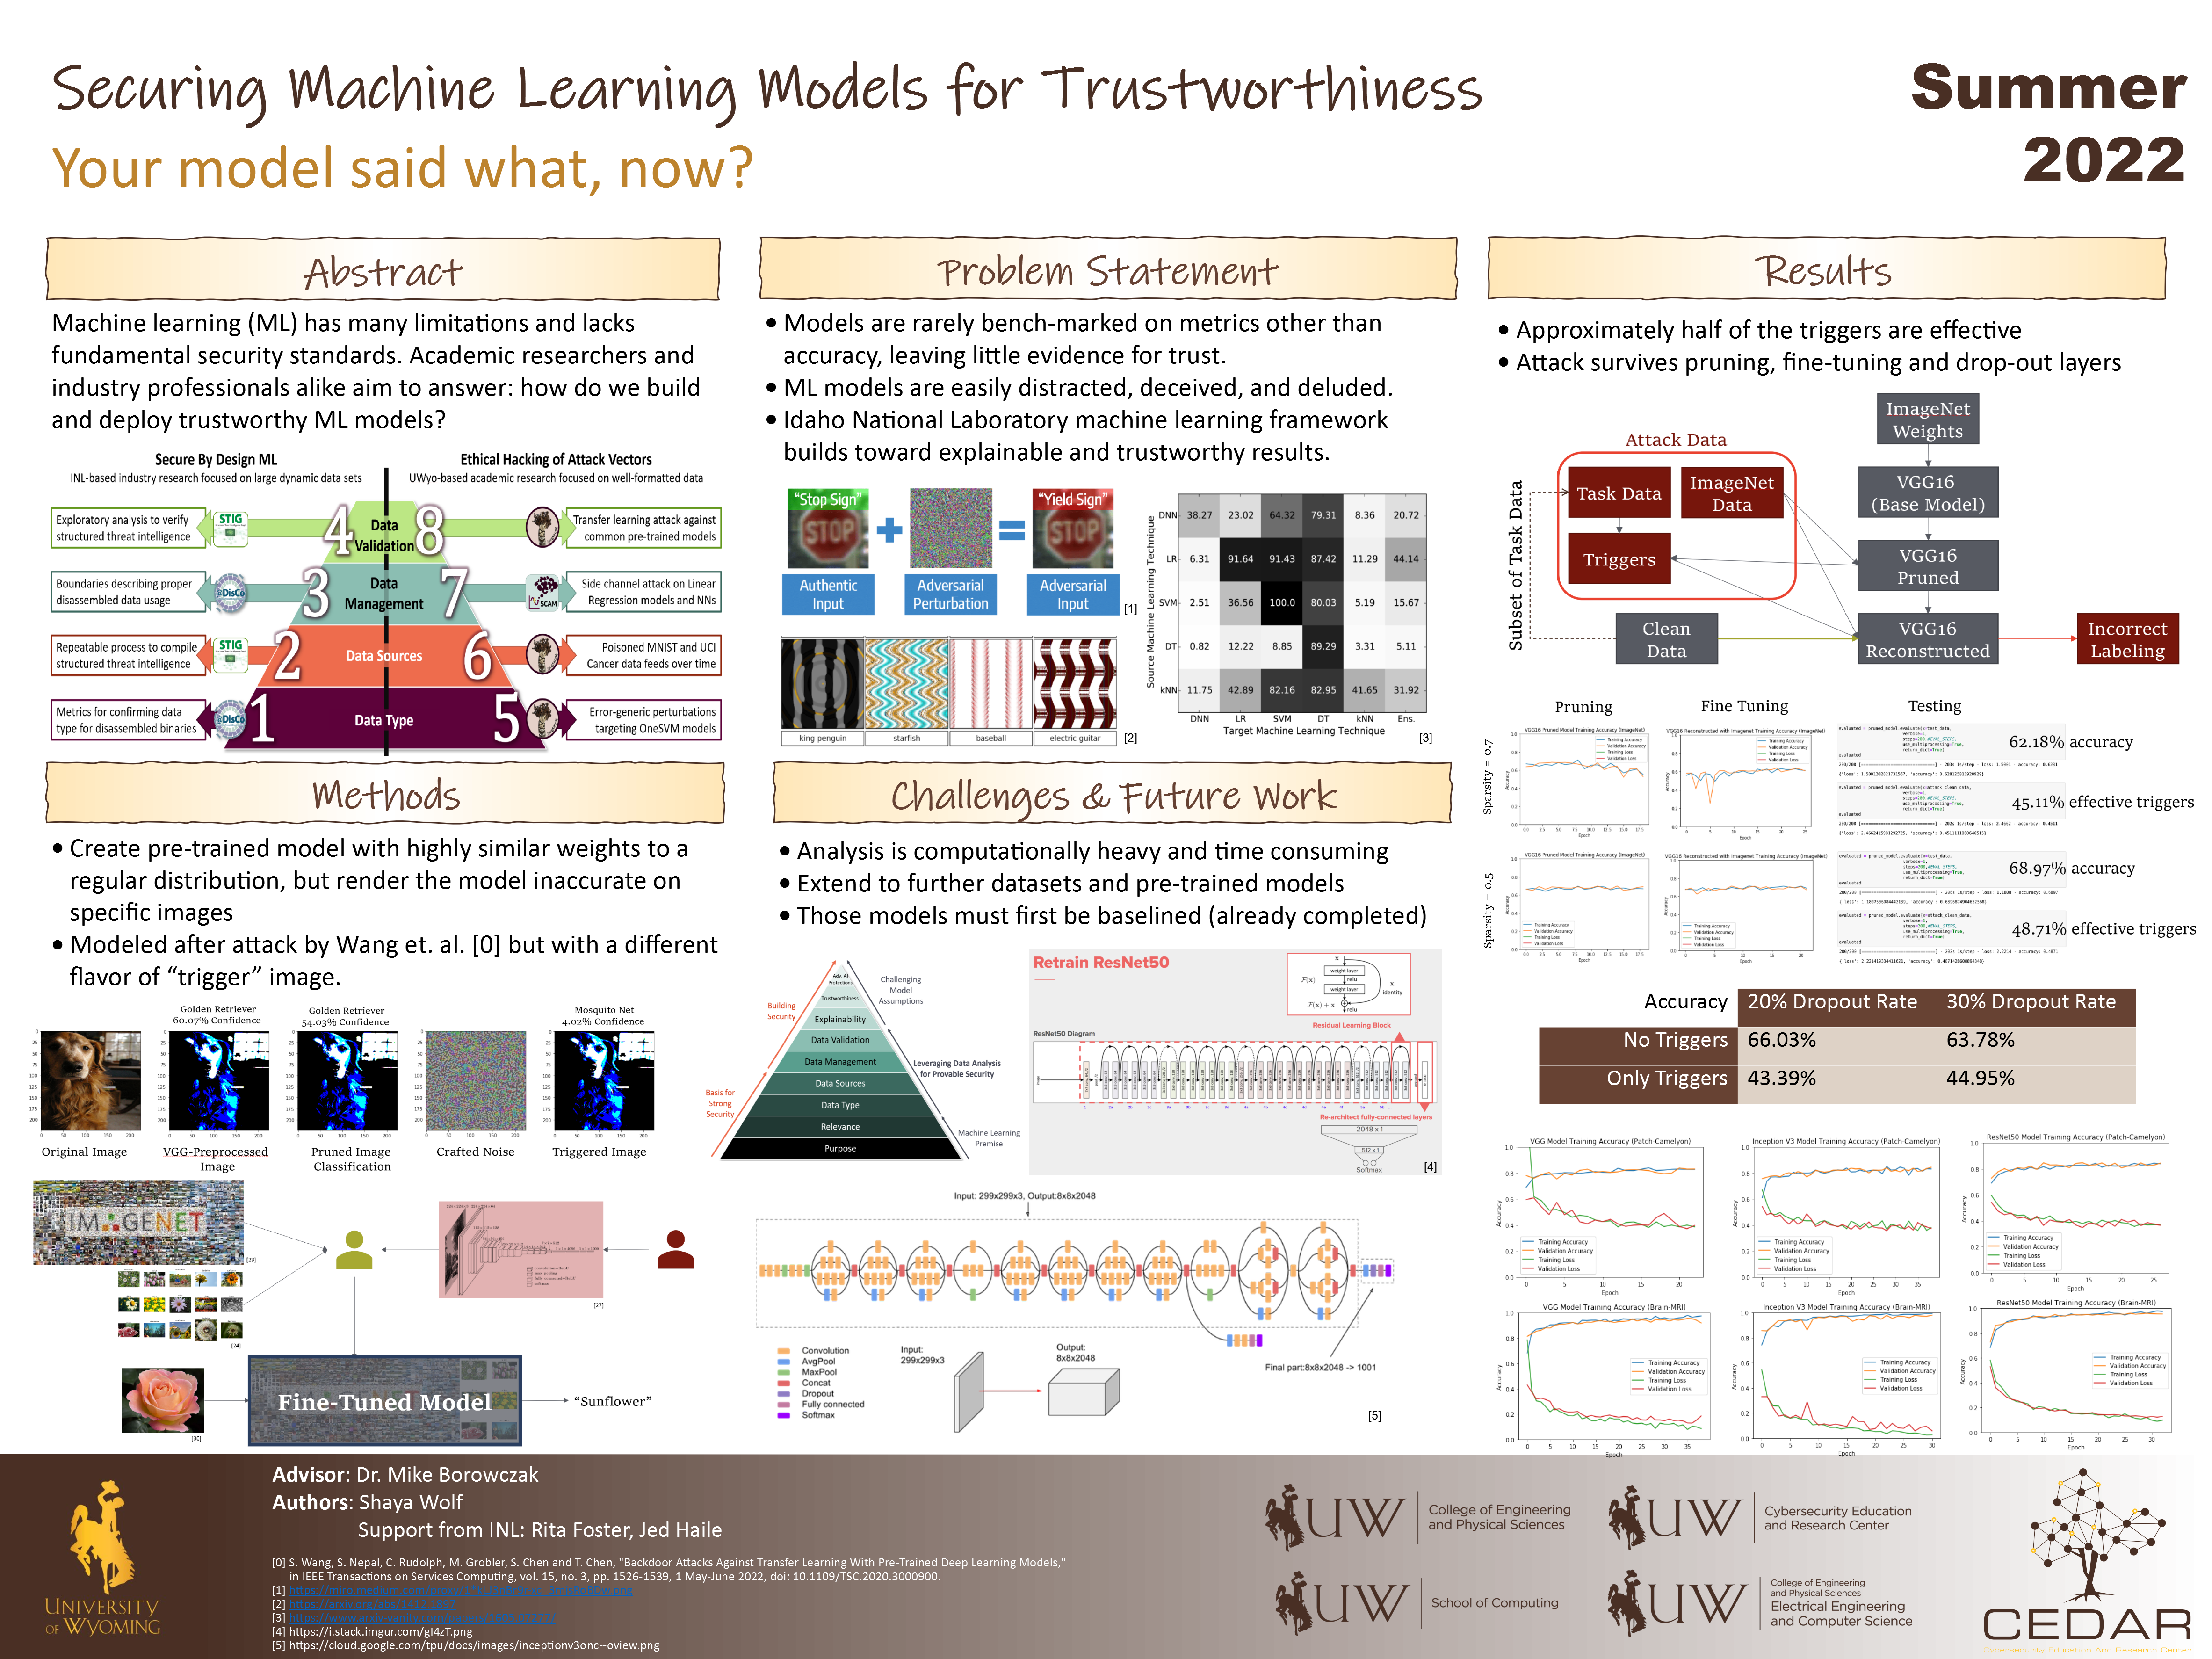  Poster for Securing Machine Learning Models for Trustworthiness